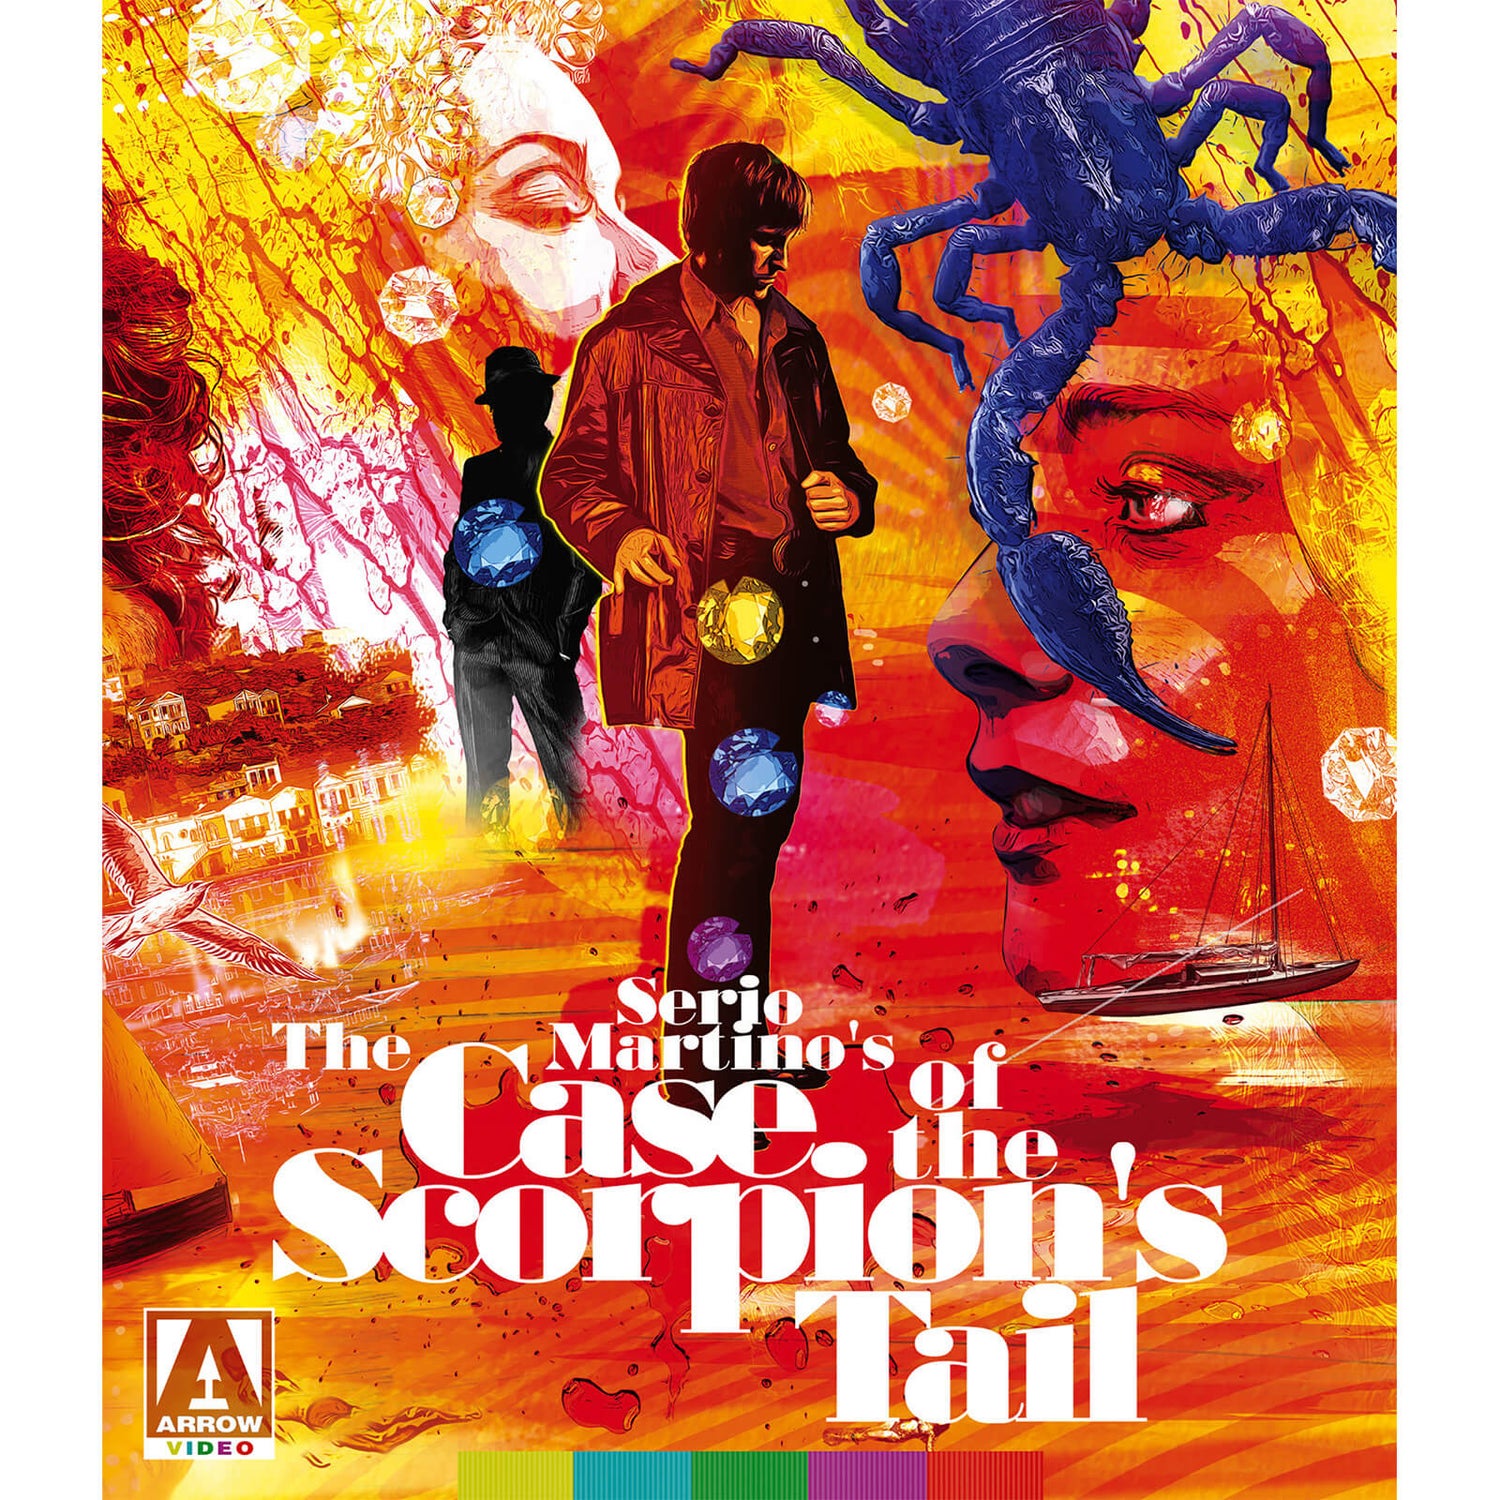 The Case Of The Scorpion's Tail Blu-ray